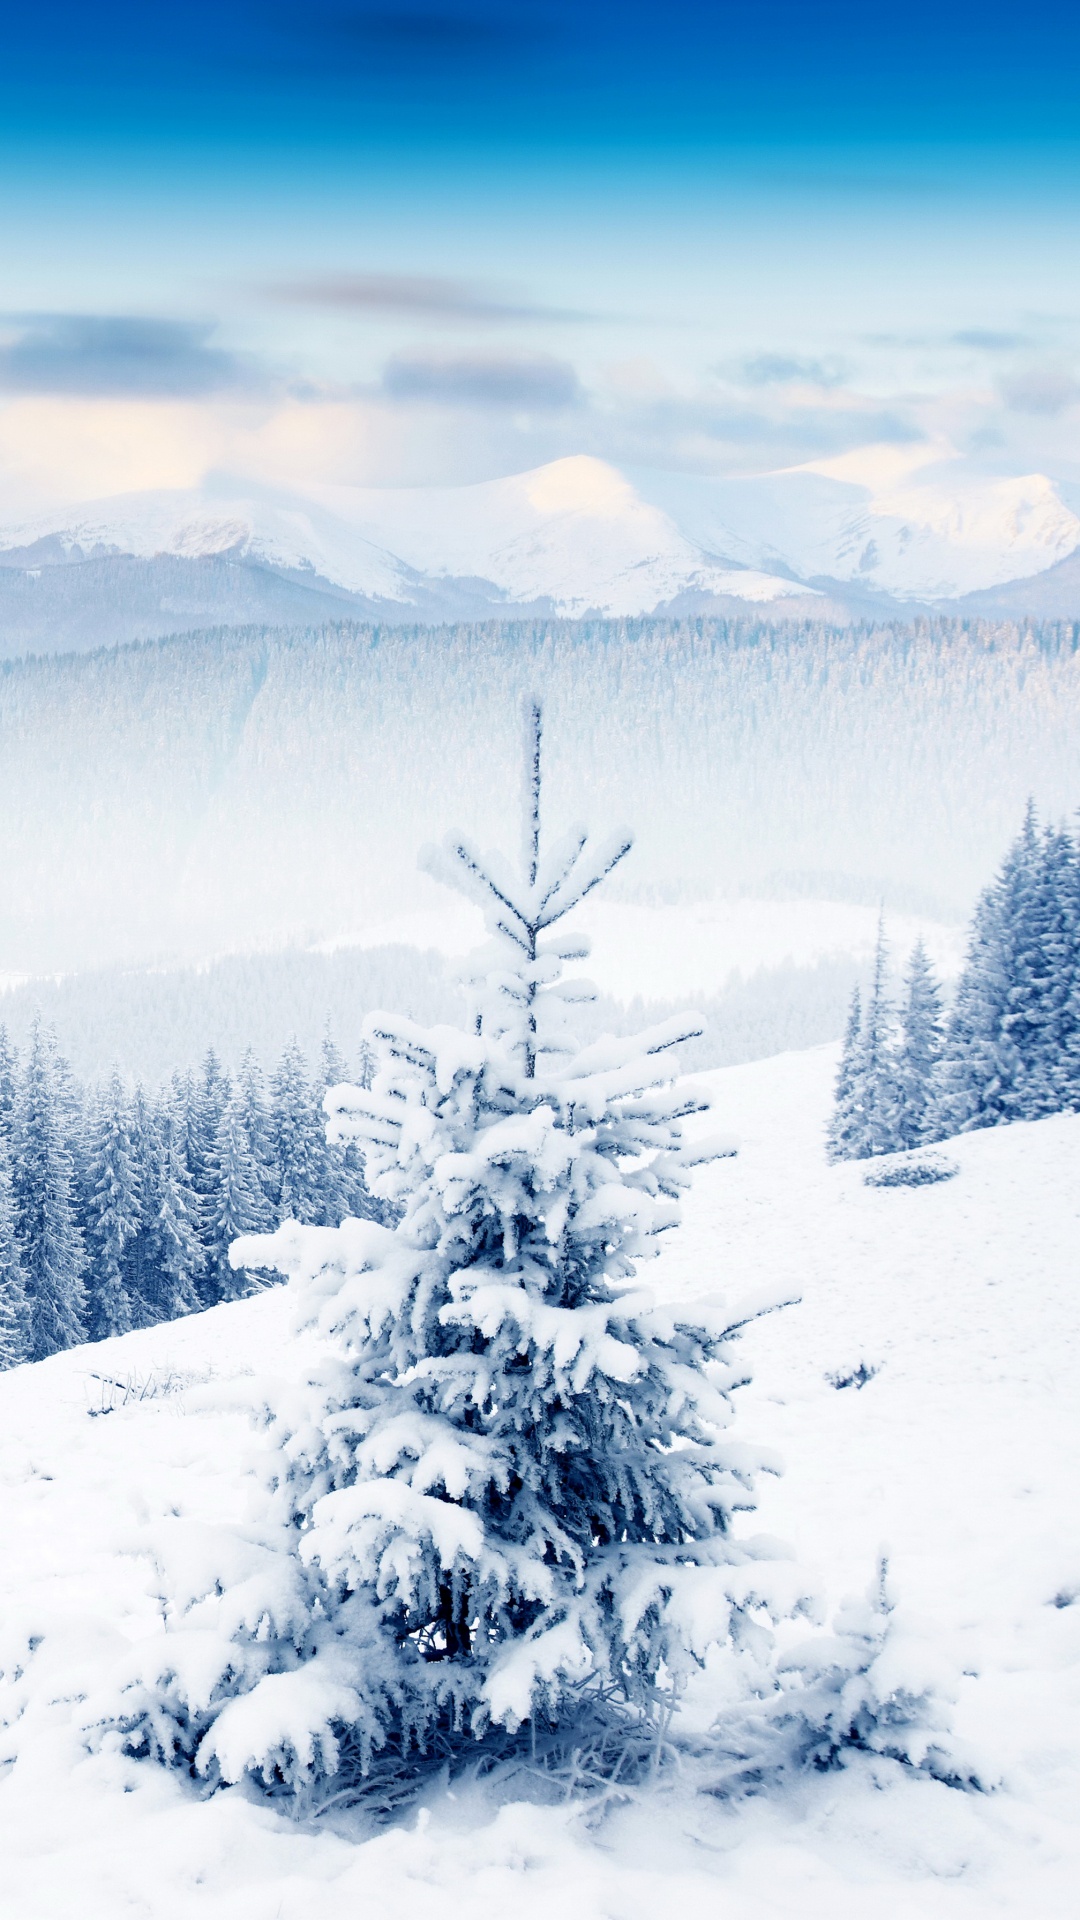 Snow Covered Pine Trees and Mountains During Daytime. Wallpaper in 1080x1920 Resolution